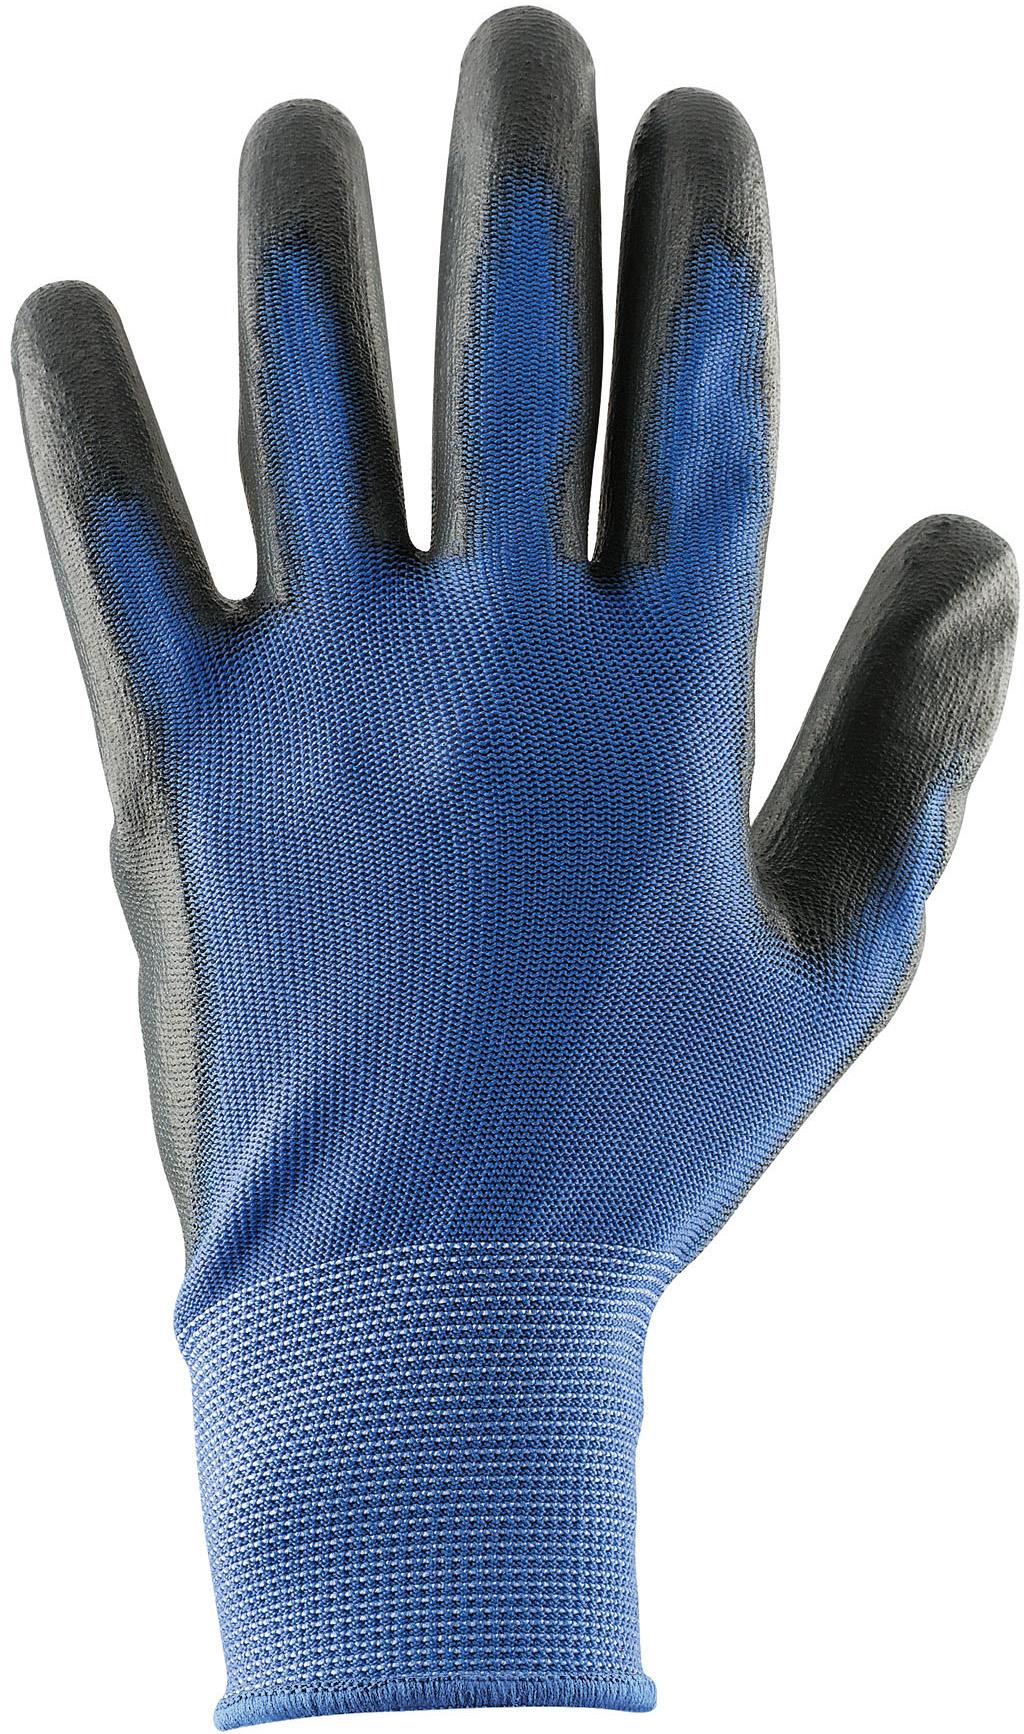 Draper Screen Touch Gloves - Large